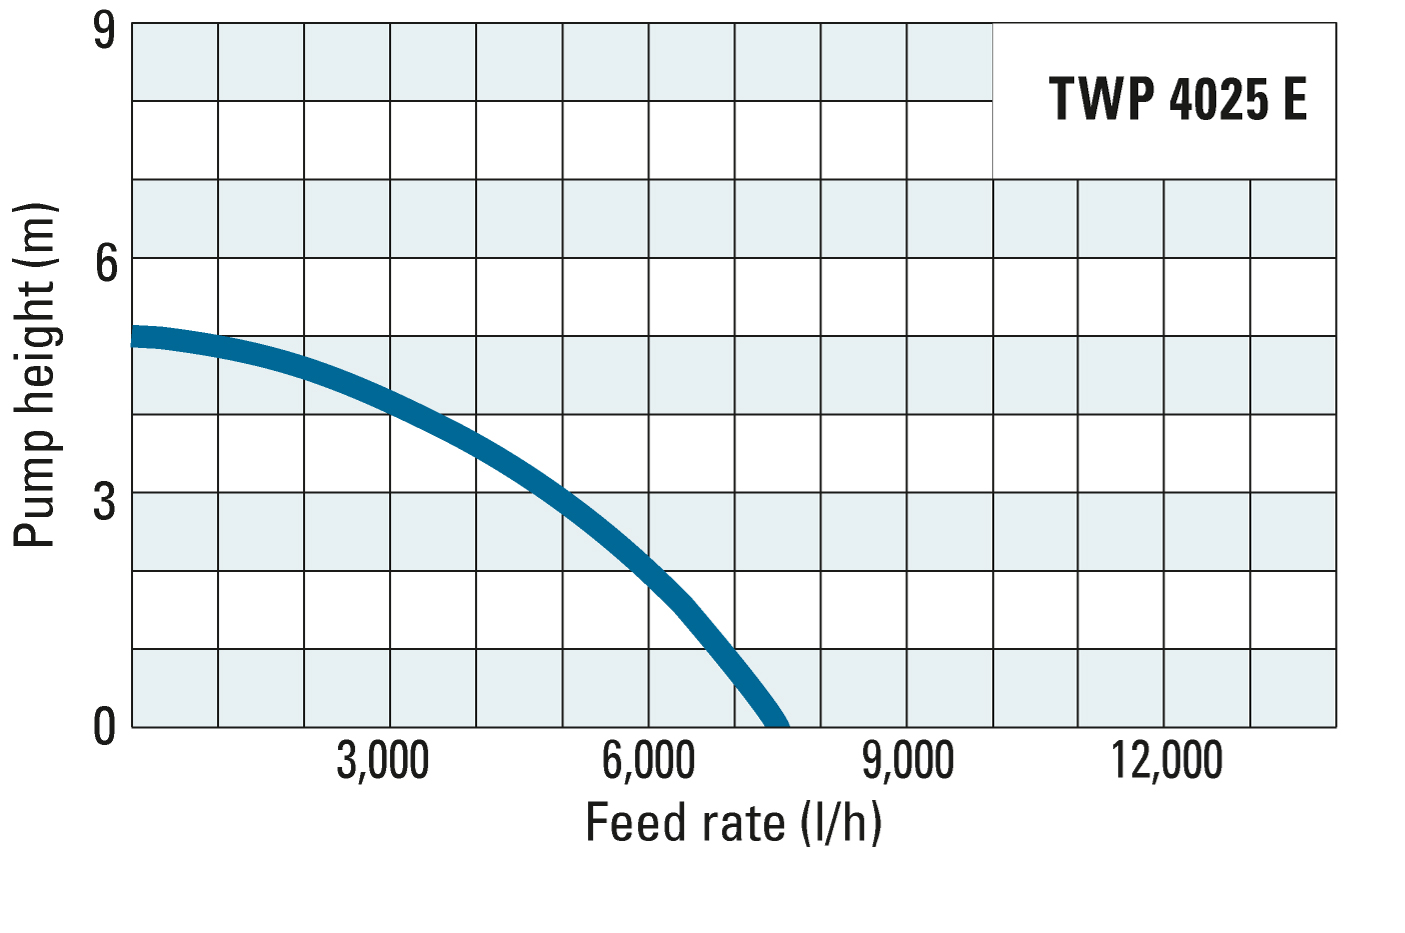 Pump height and feed rate of the TWP 4025 E